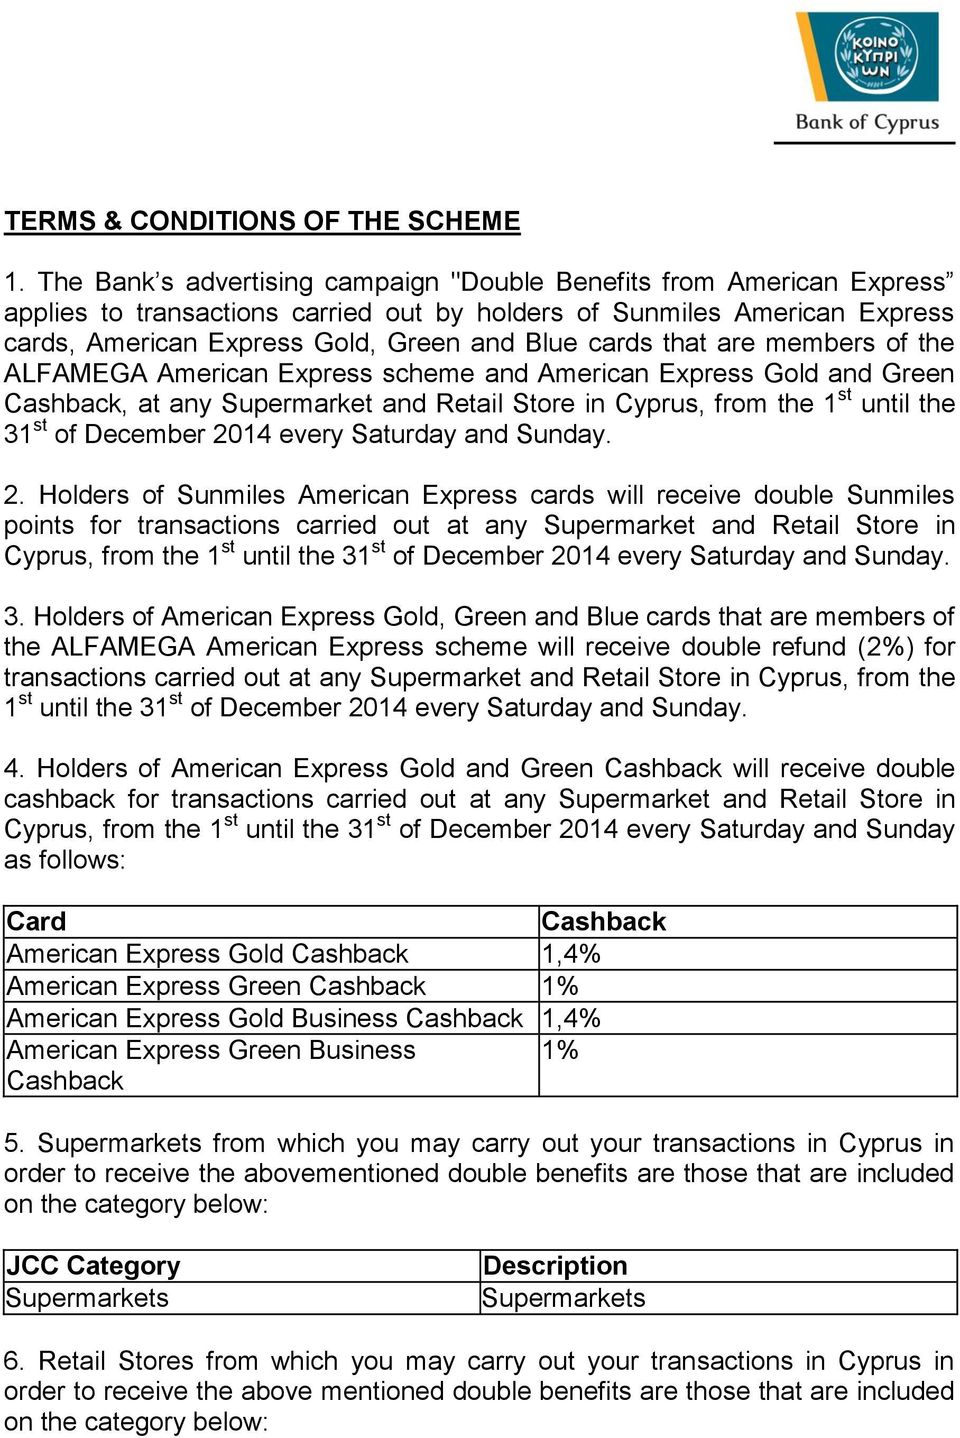 that are members of the ALFAMEGA American Express scheme and American Express Gold and Green Cashback, at any Supermarket and Retail Store in Cyprus, from the 1 st until the 31 st of December 2014